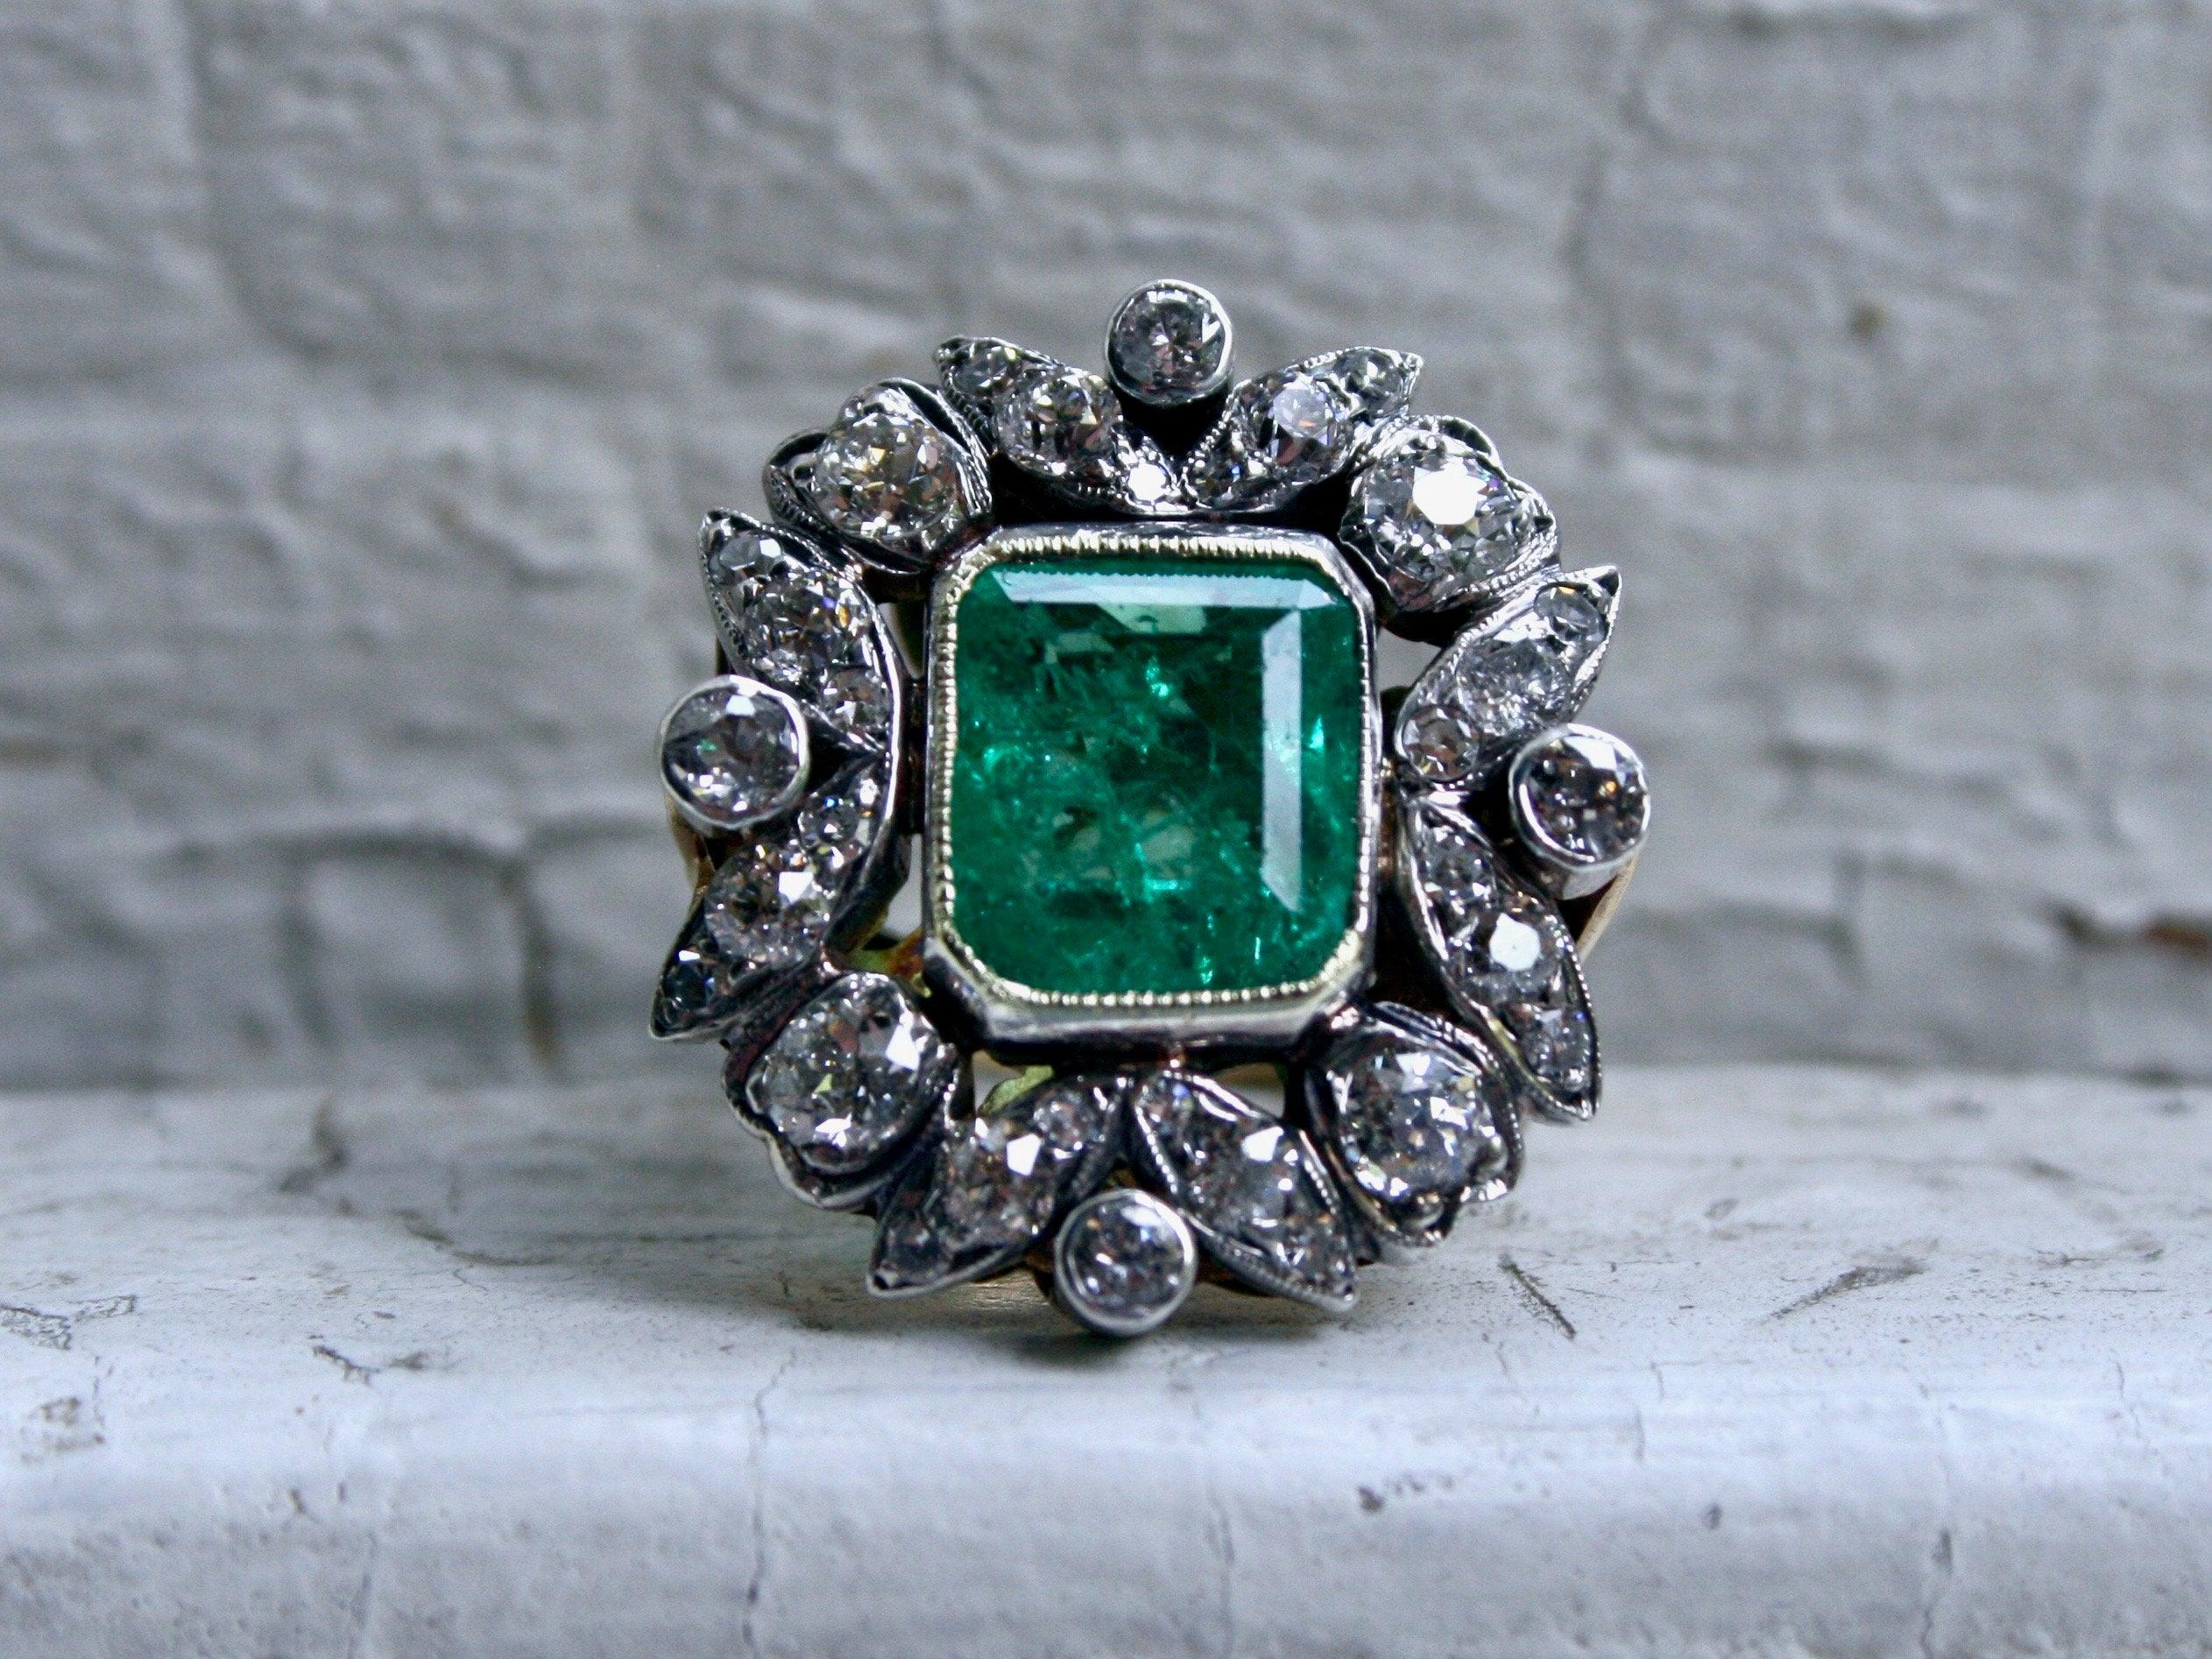 I'm so in LOVE with this Stunning Antique Victorian Diamond and Emerald Halo Ring - it is amazing! Crafted in 18K Yellow Gold, the ring is beautifully designed with a center Natural Emerald, surrounded by leaves of super sparkly diamonds, with a